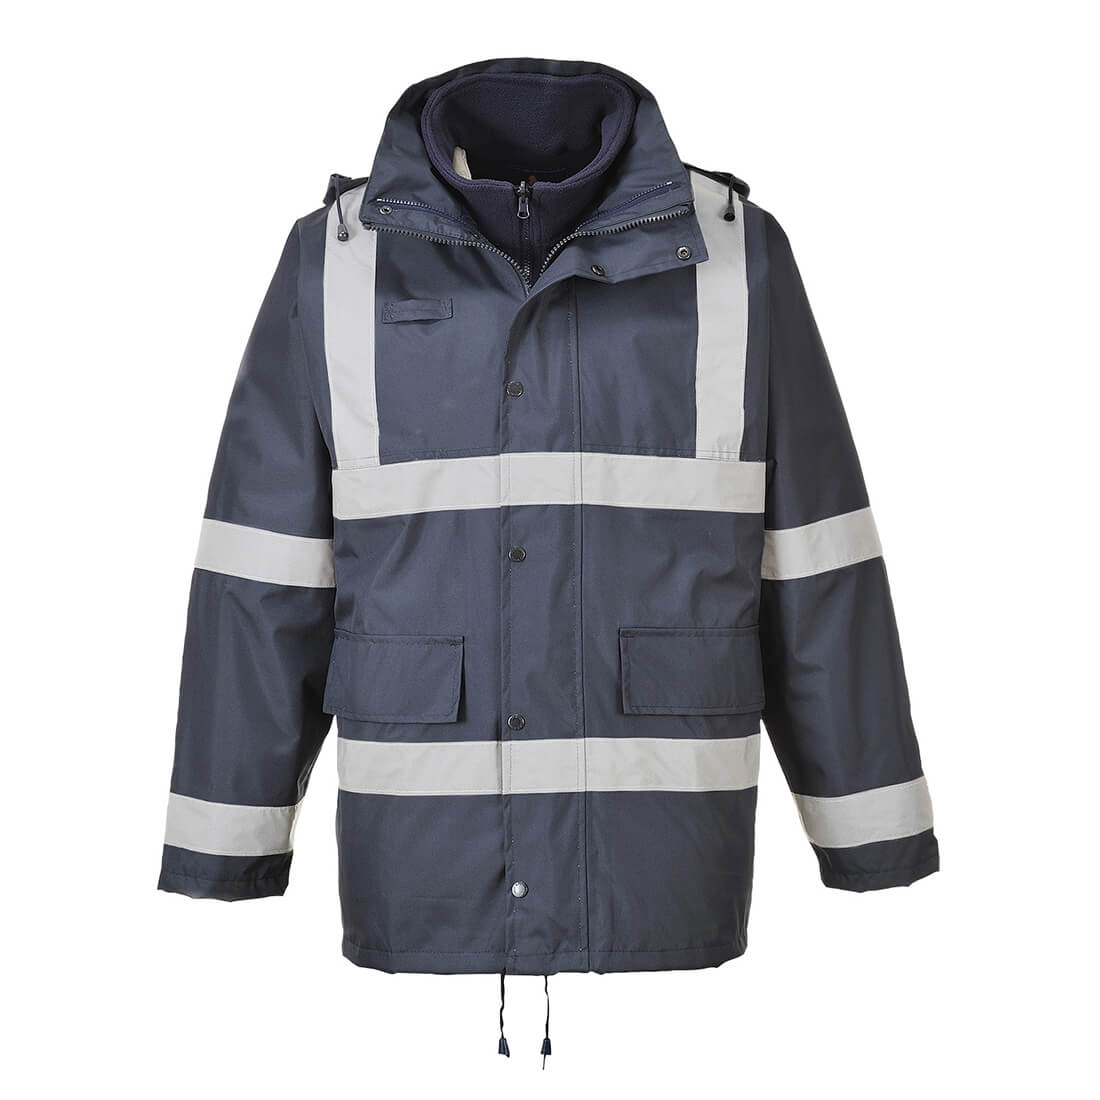 Photo of Portwest S431 Iona 3in1 Traffic Jacket Navy S